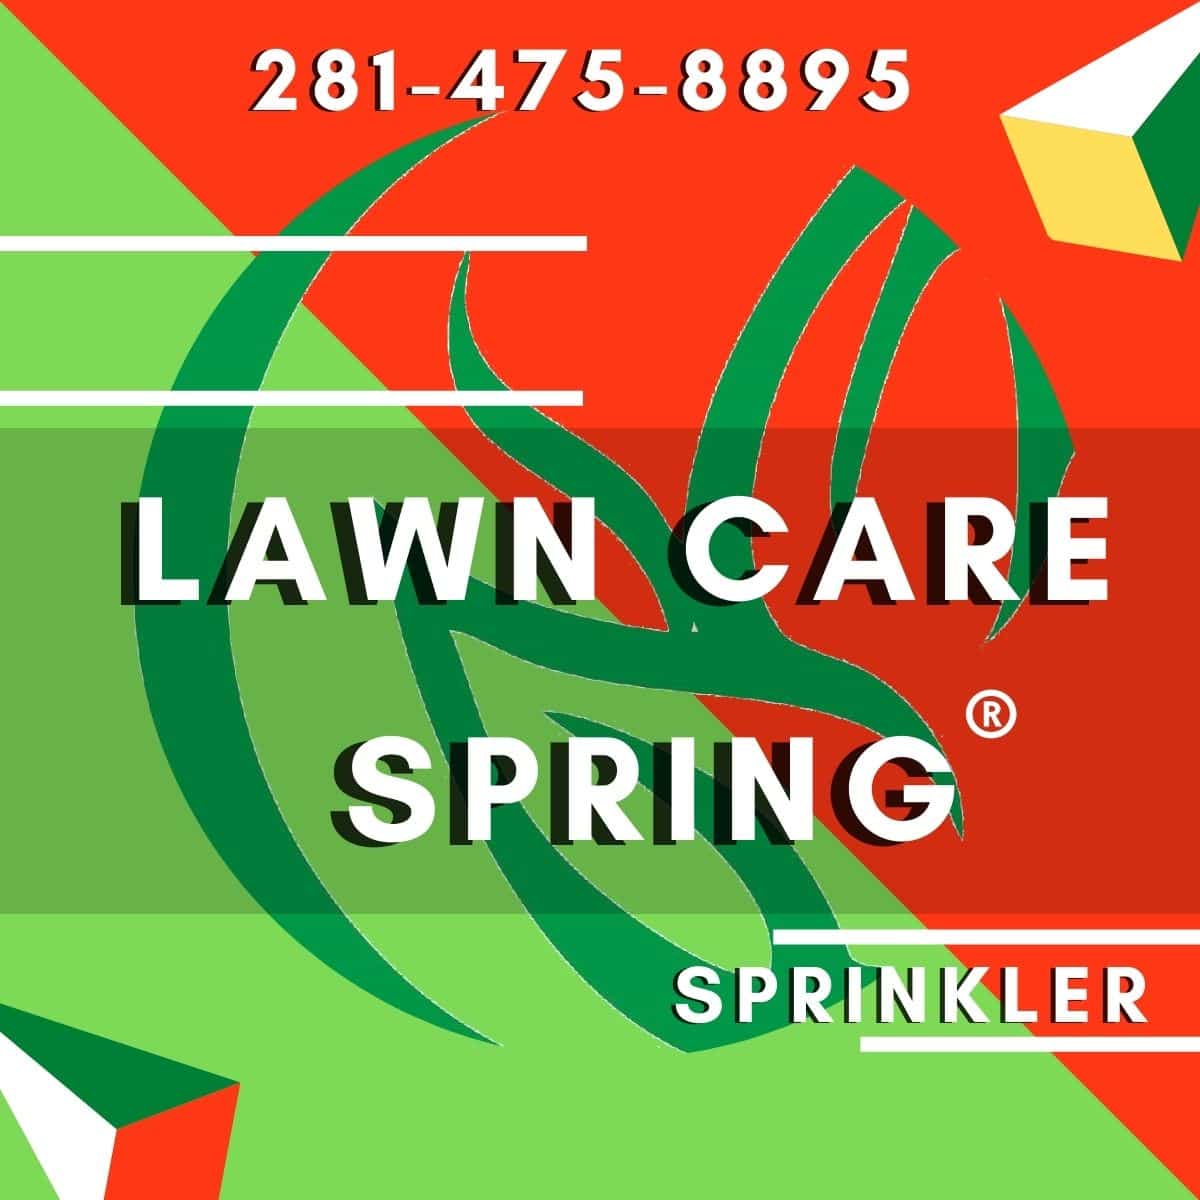 Tomball Lawn Care Services